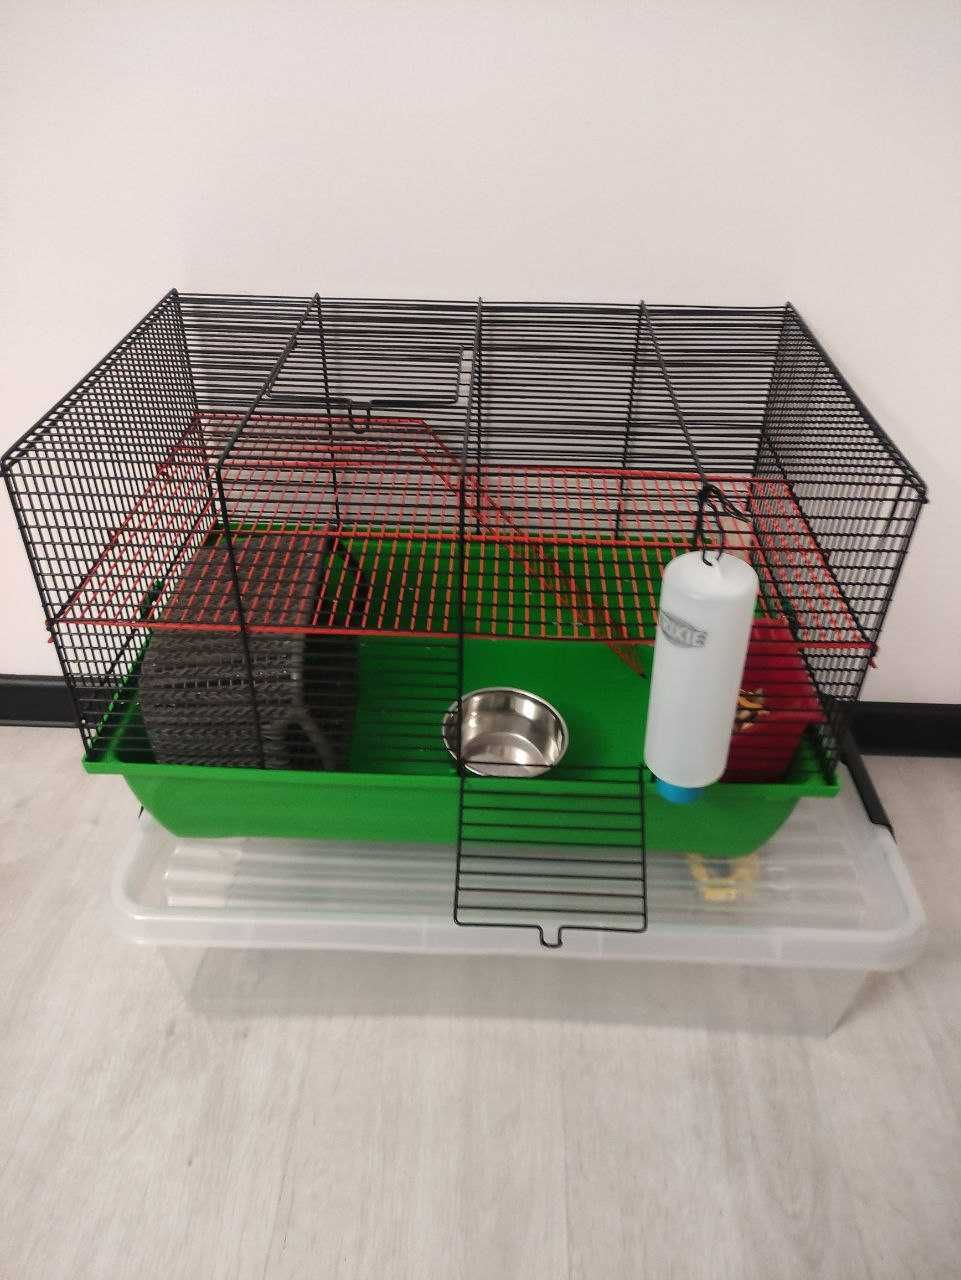 Cage for rats, hamsters or mice